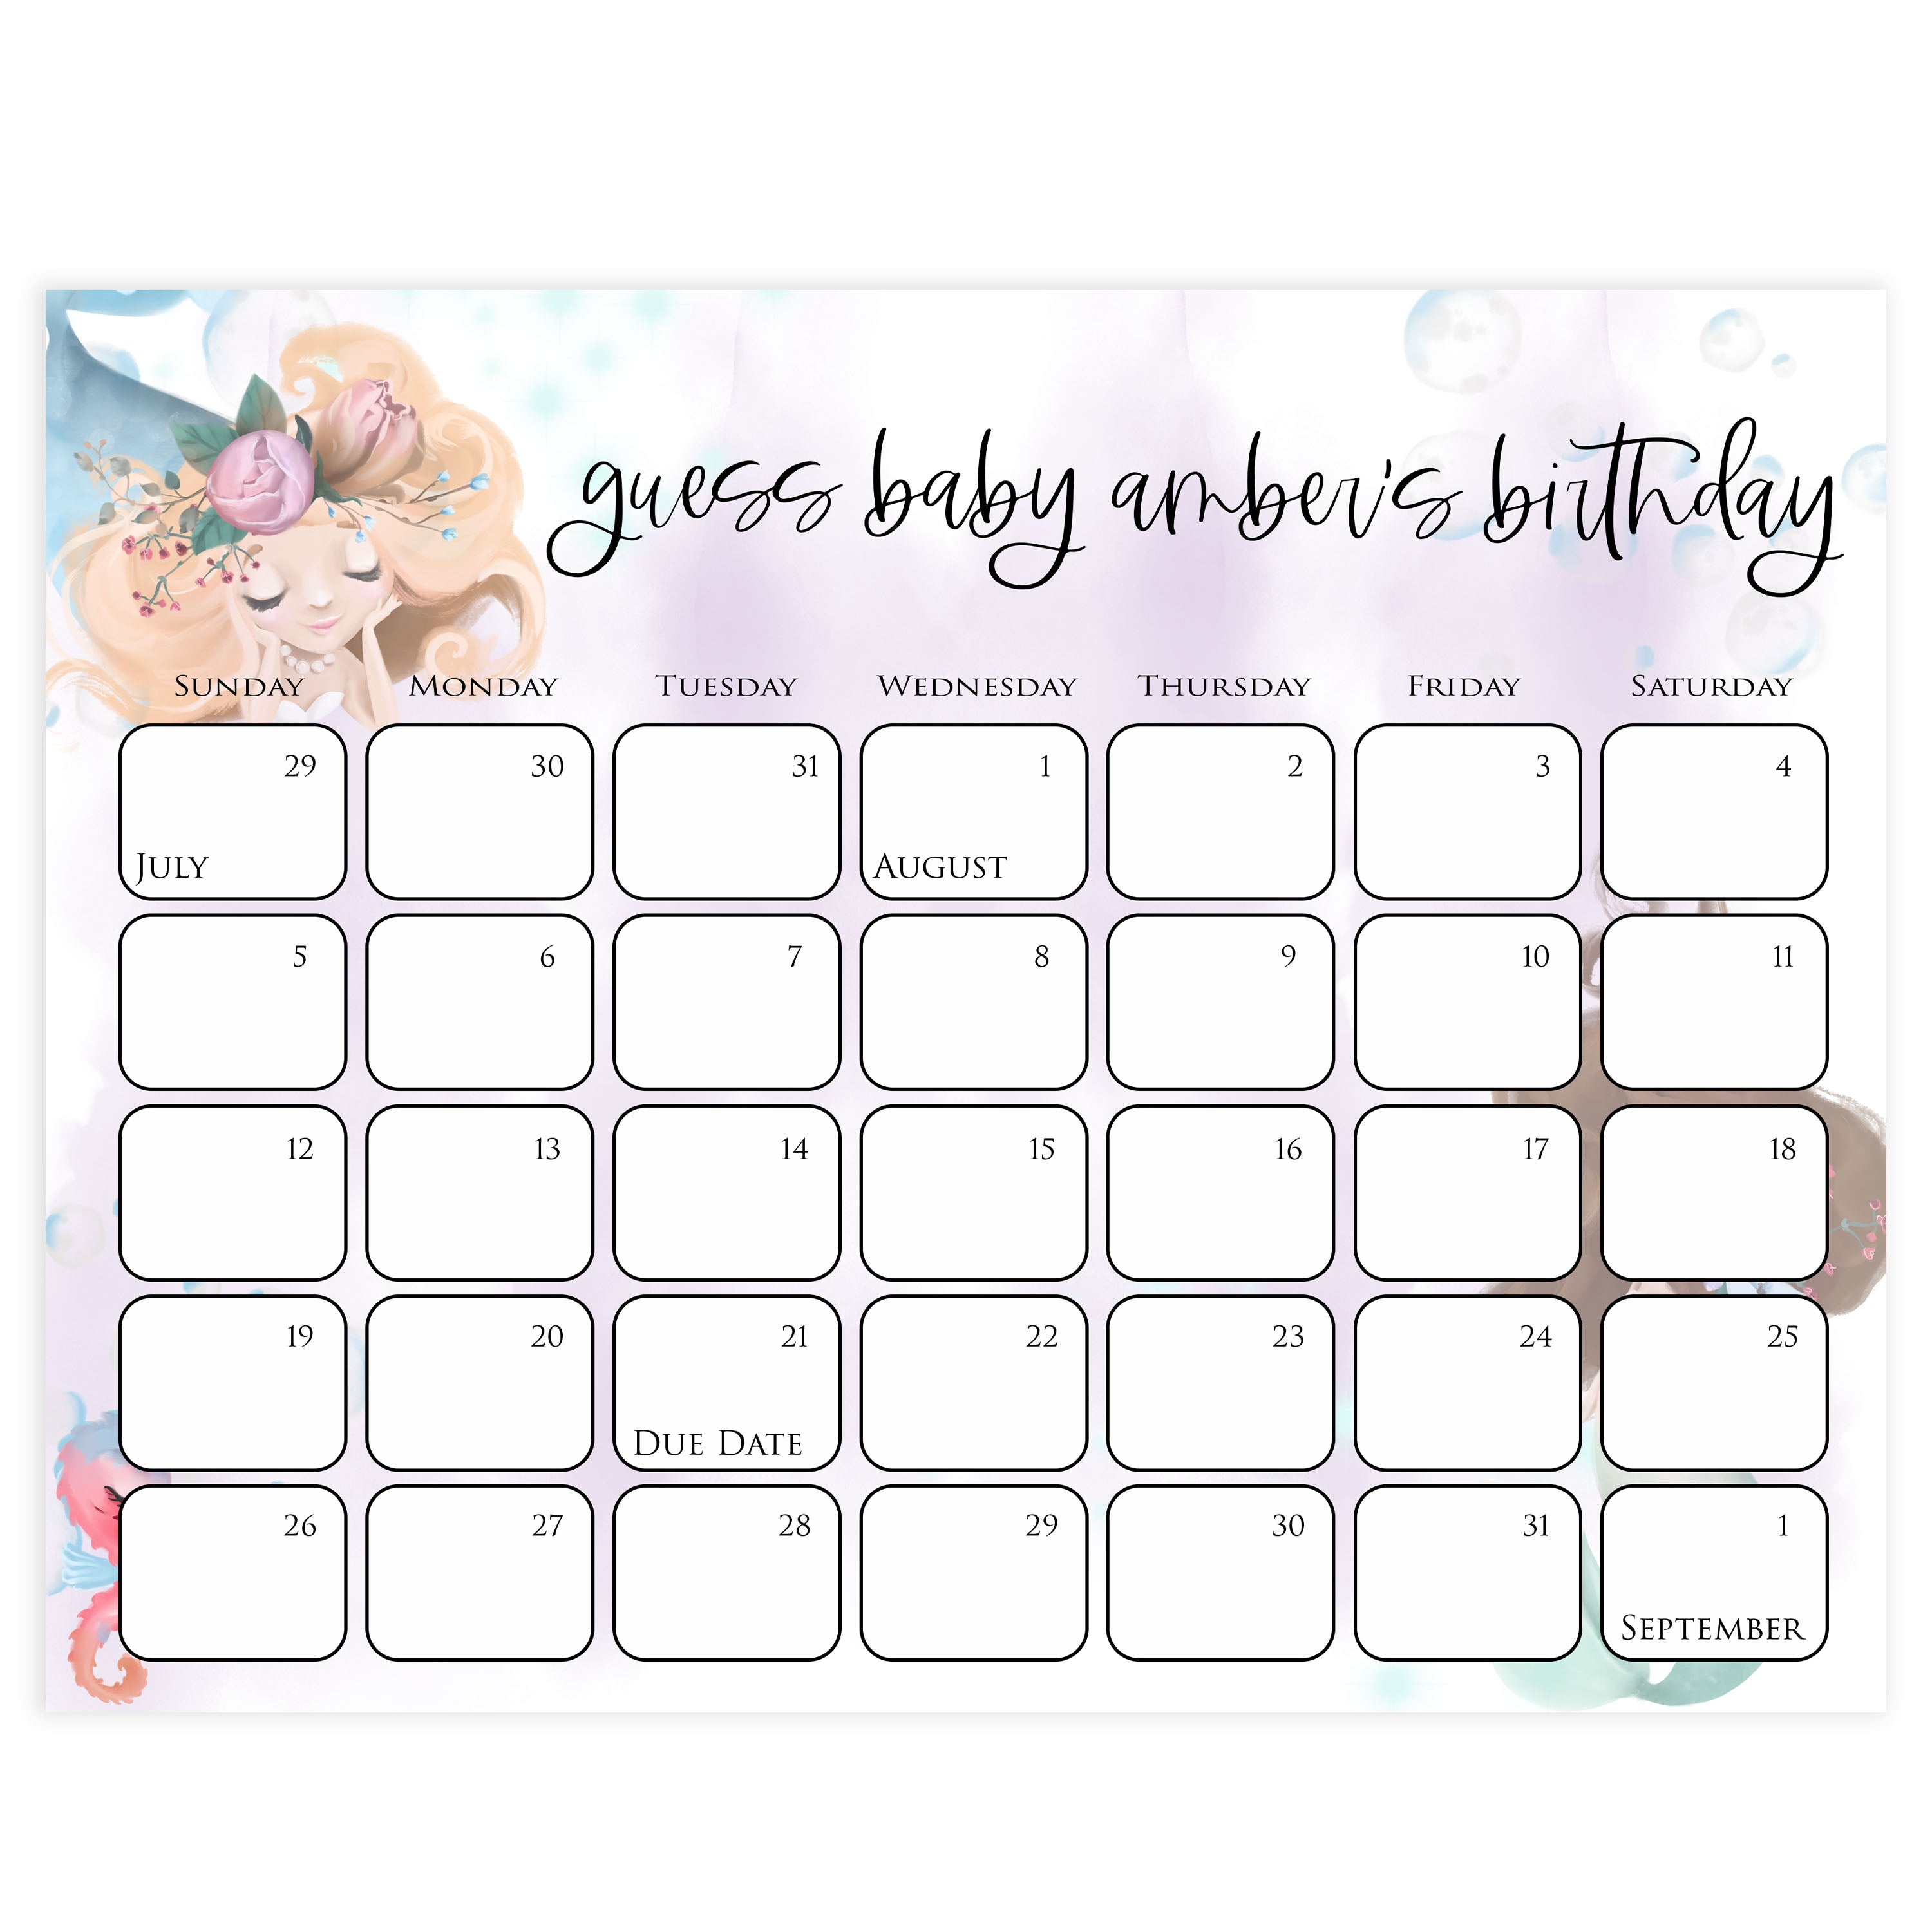 guess the baby birthday game, Printable baby shower games, little mermaid baby games, baby shower games, fun baby shower ideas, top baby shower ideas, little mermaid baby shower, baby shower games, pink hearts baby shower ideas